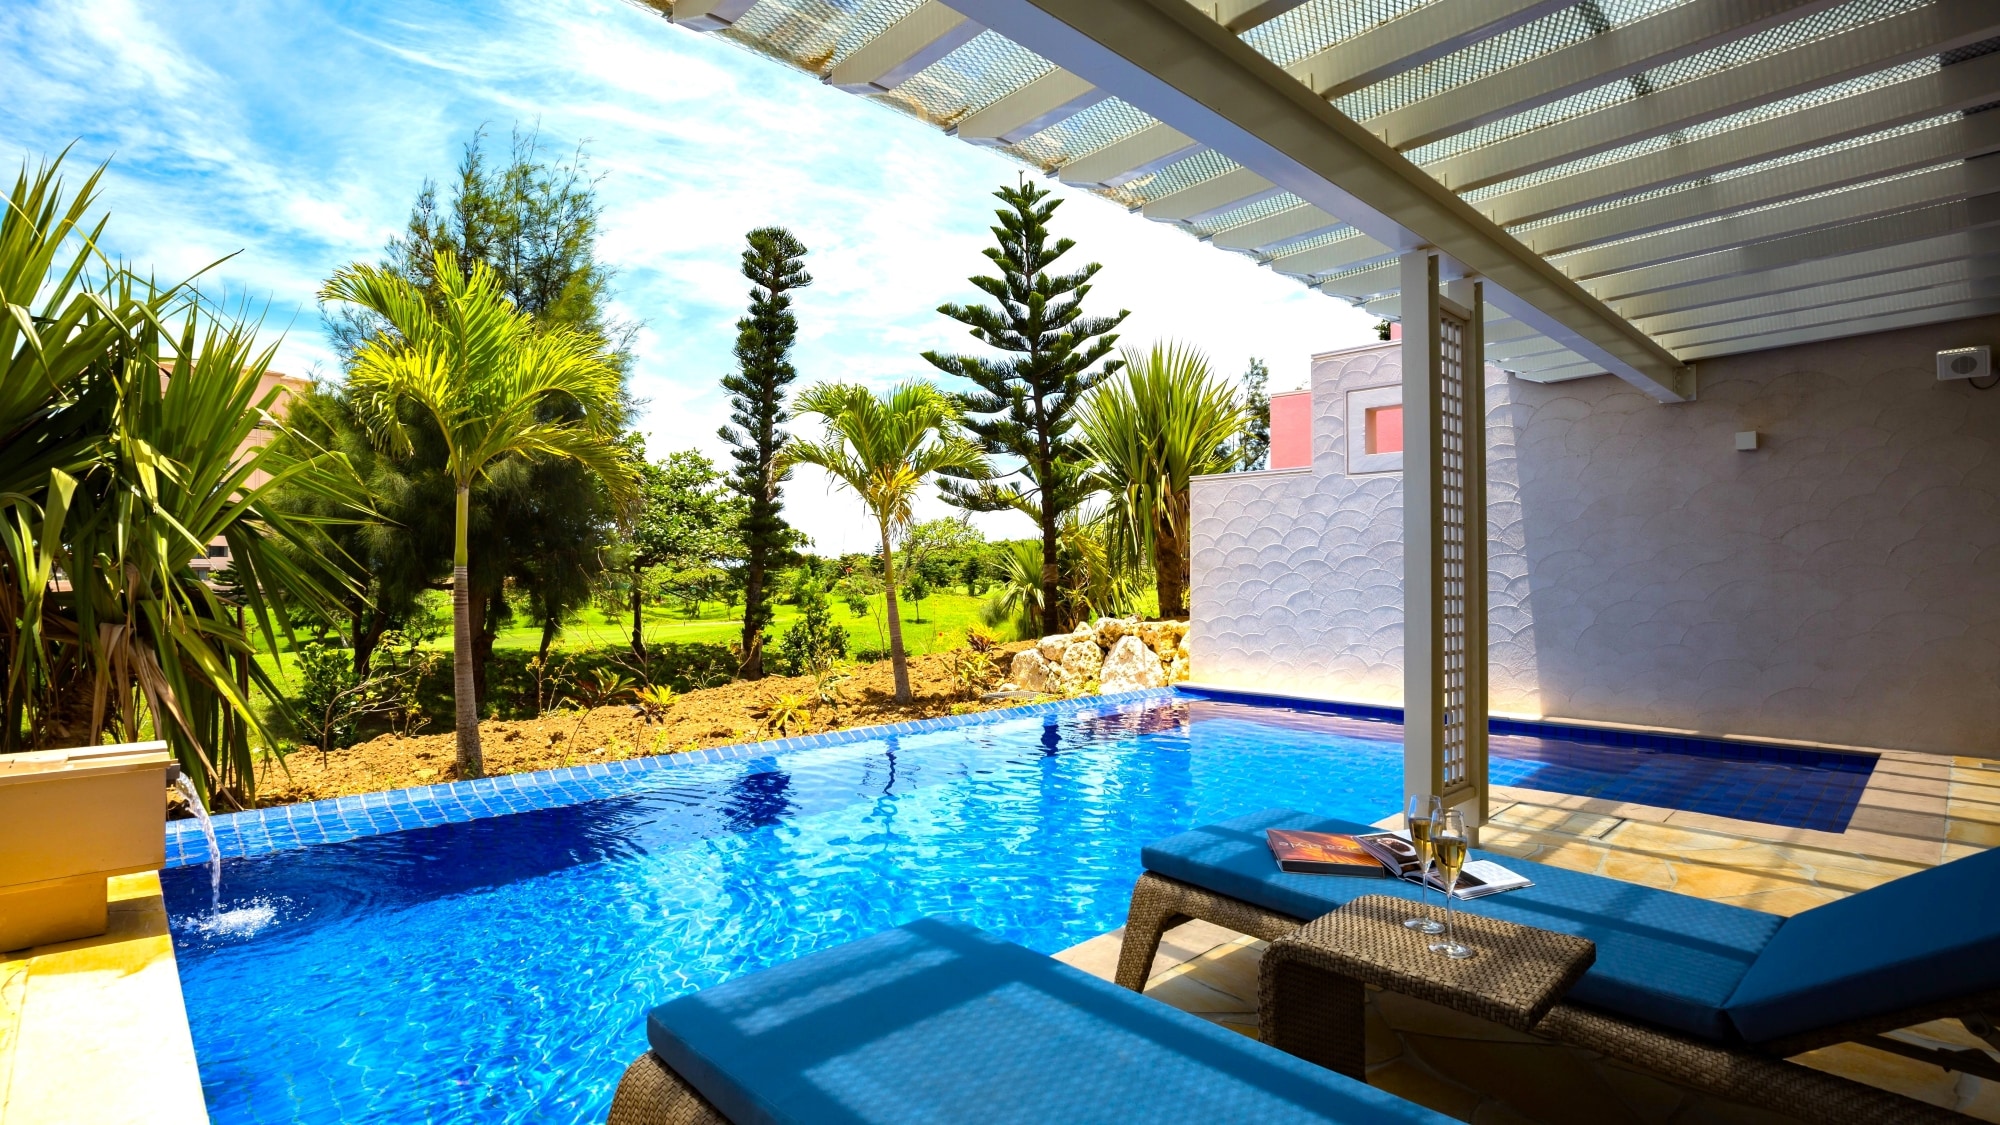 [Pool Villa Premier 1F] The terrace is equipped with a private pool with a dazzling blue water surface.